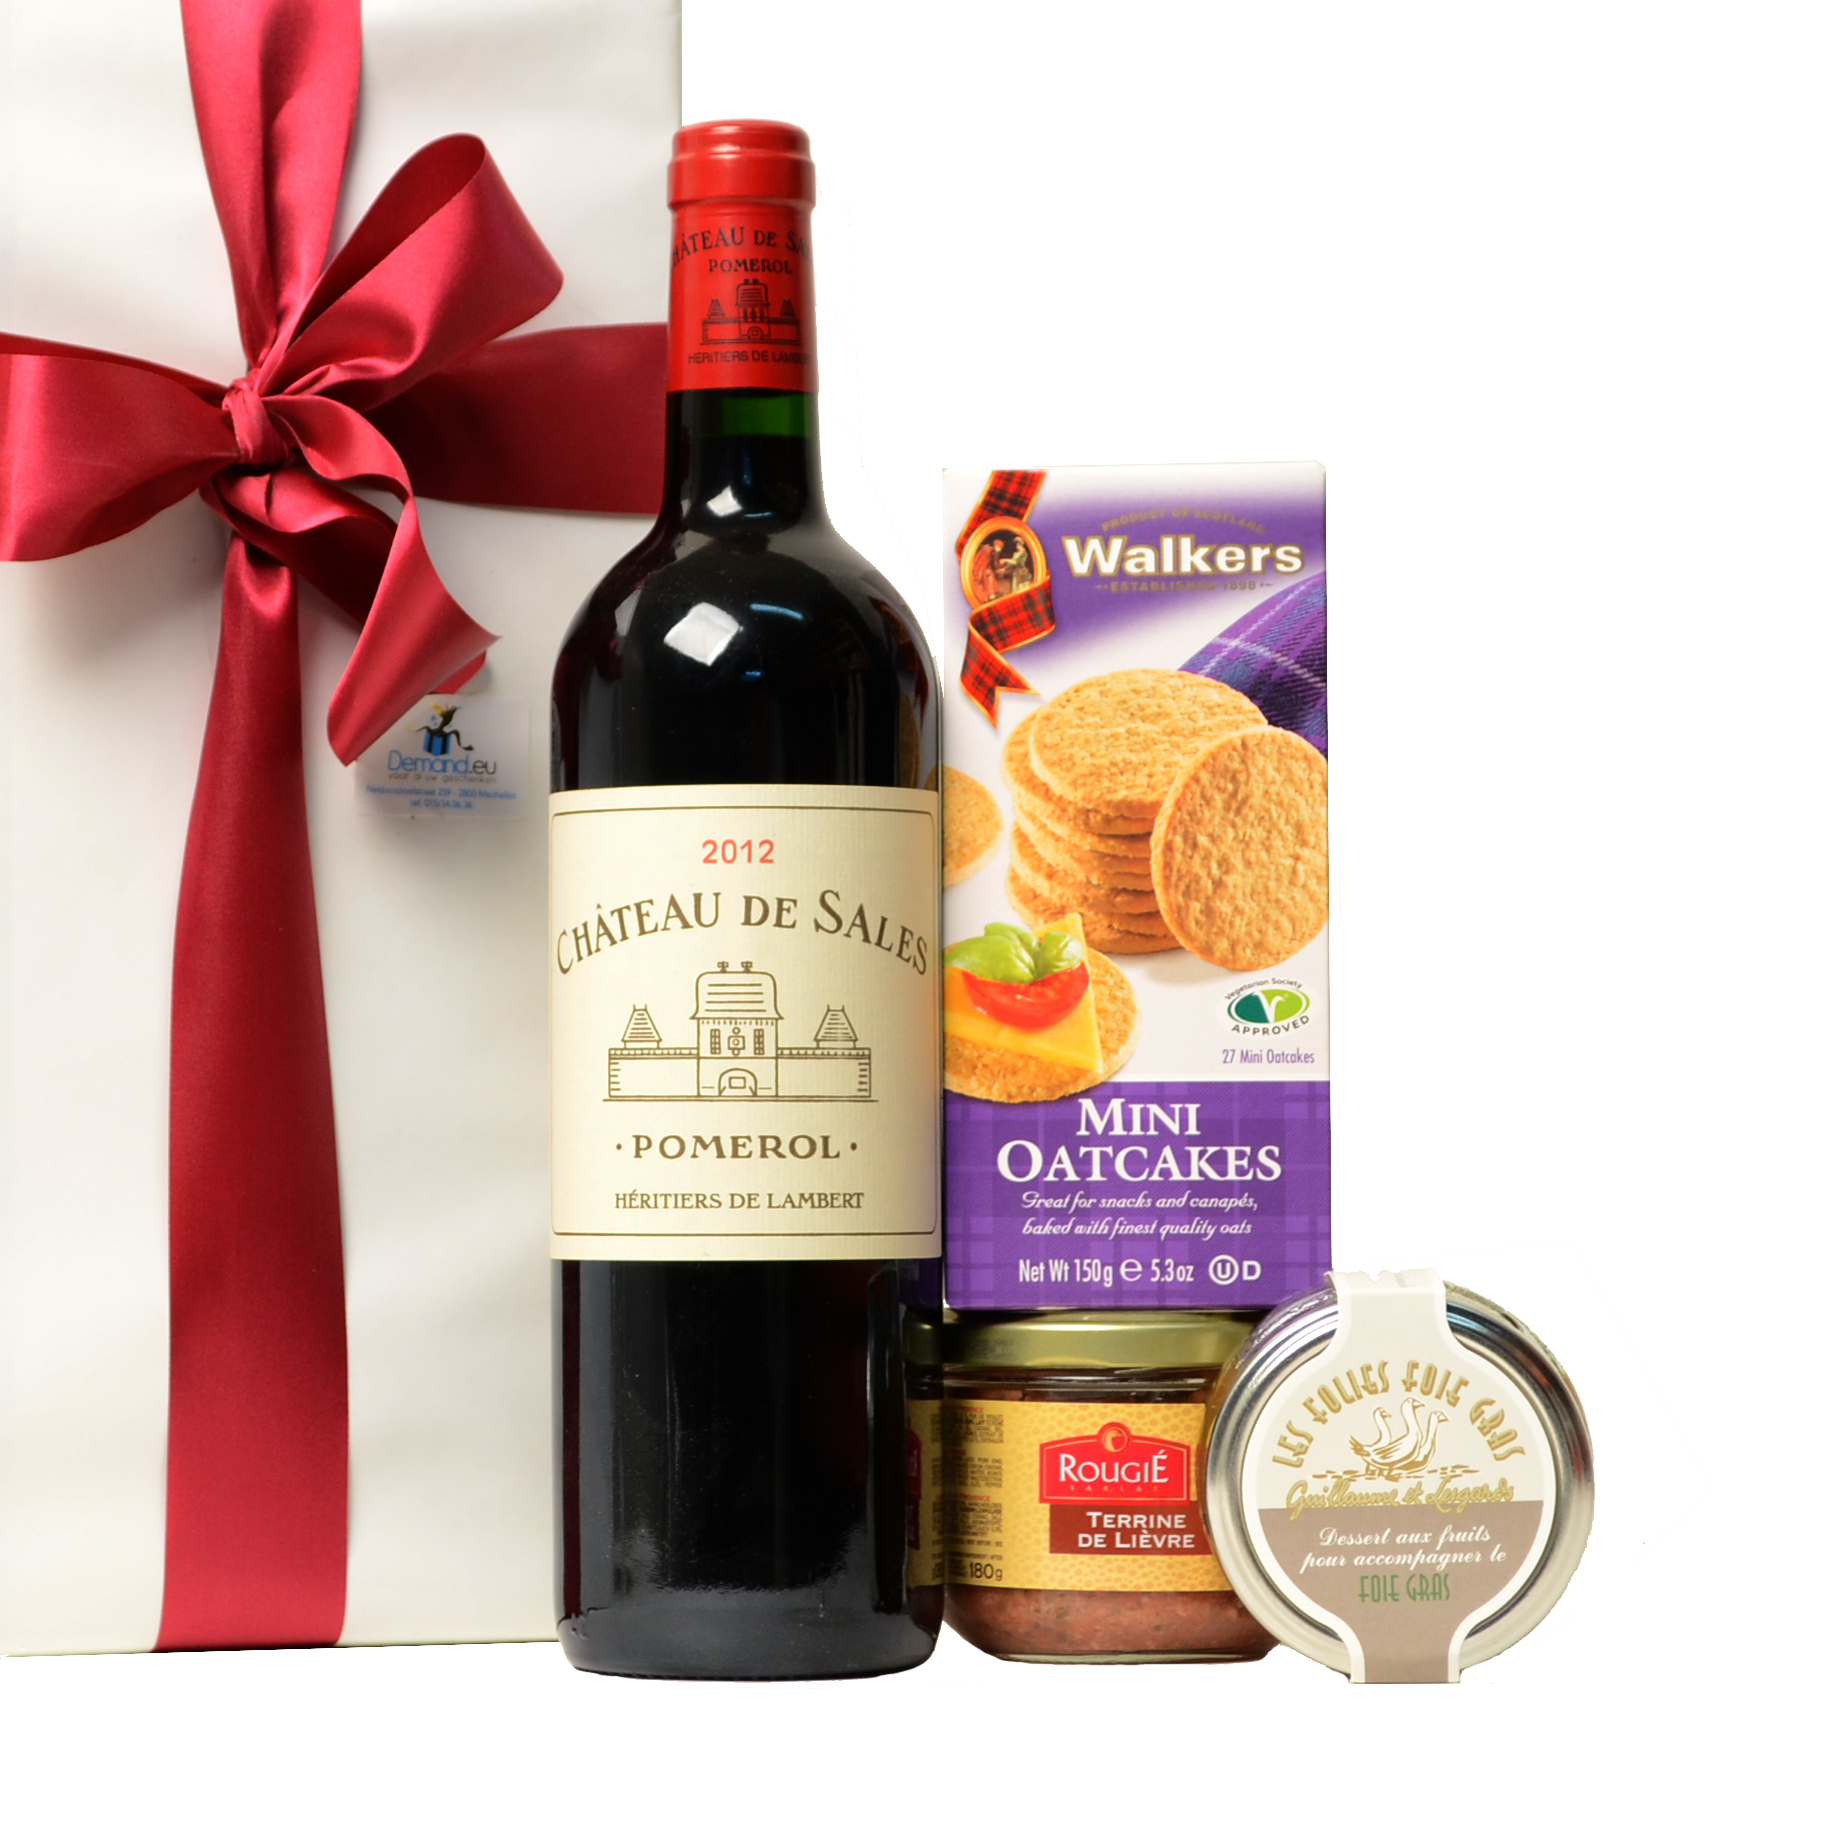 Aperitif Package with French Pomerol wine